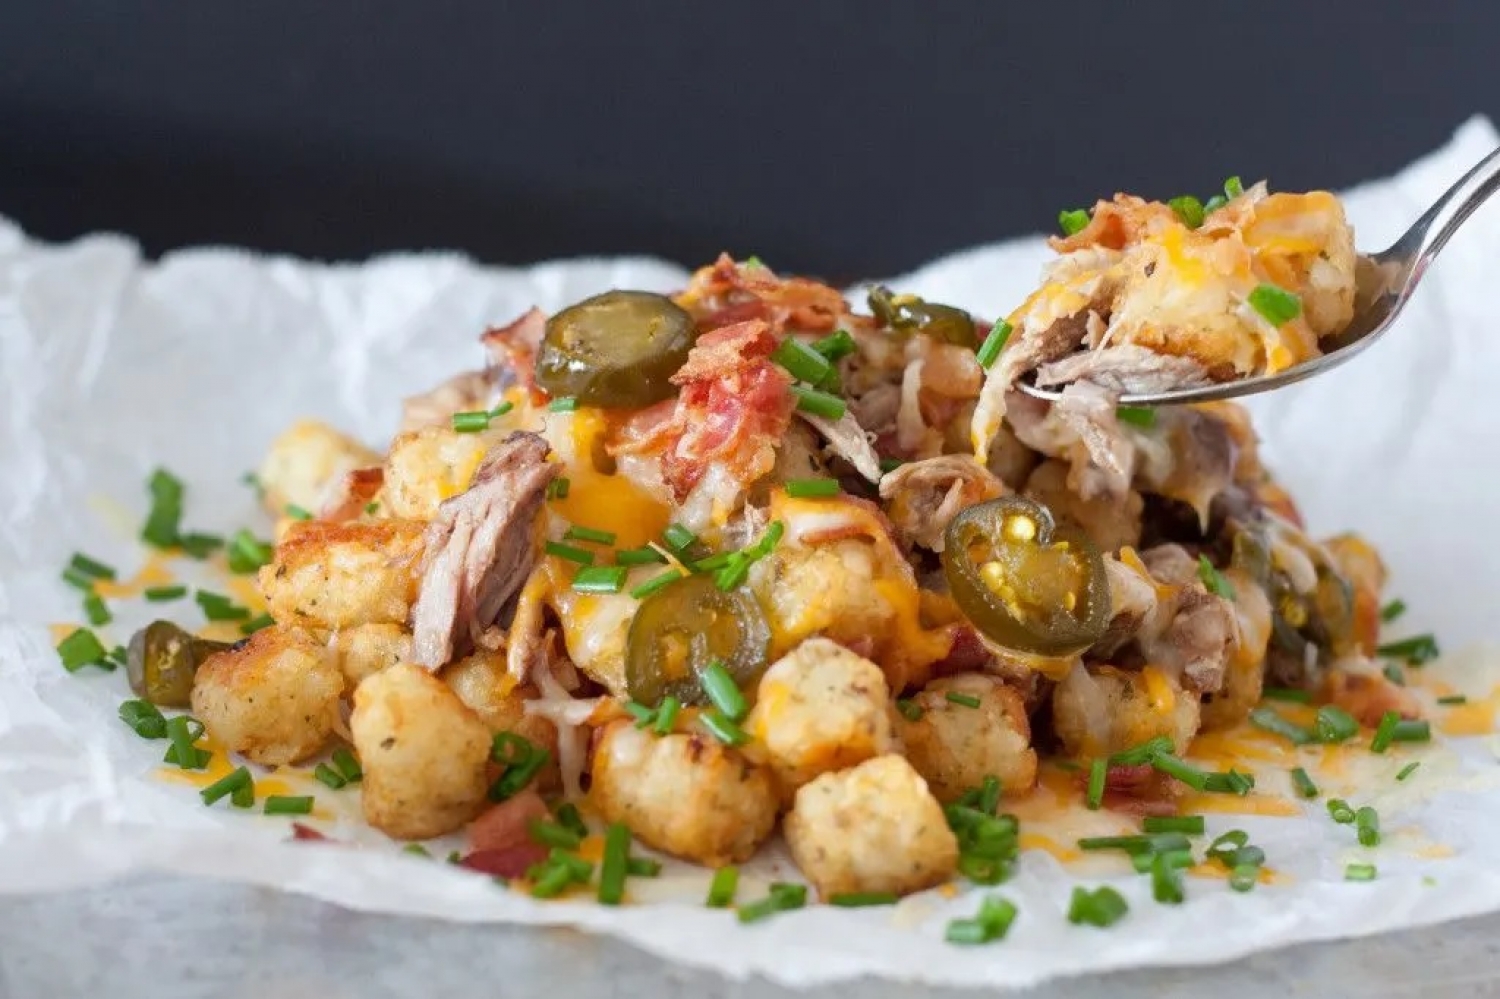 Deliciously Epic Tater Tot Casseroles, Totchos & More